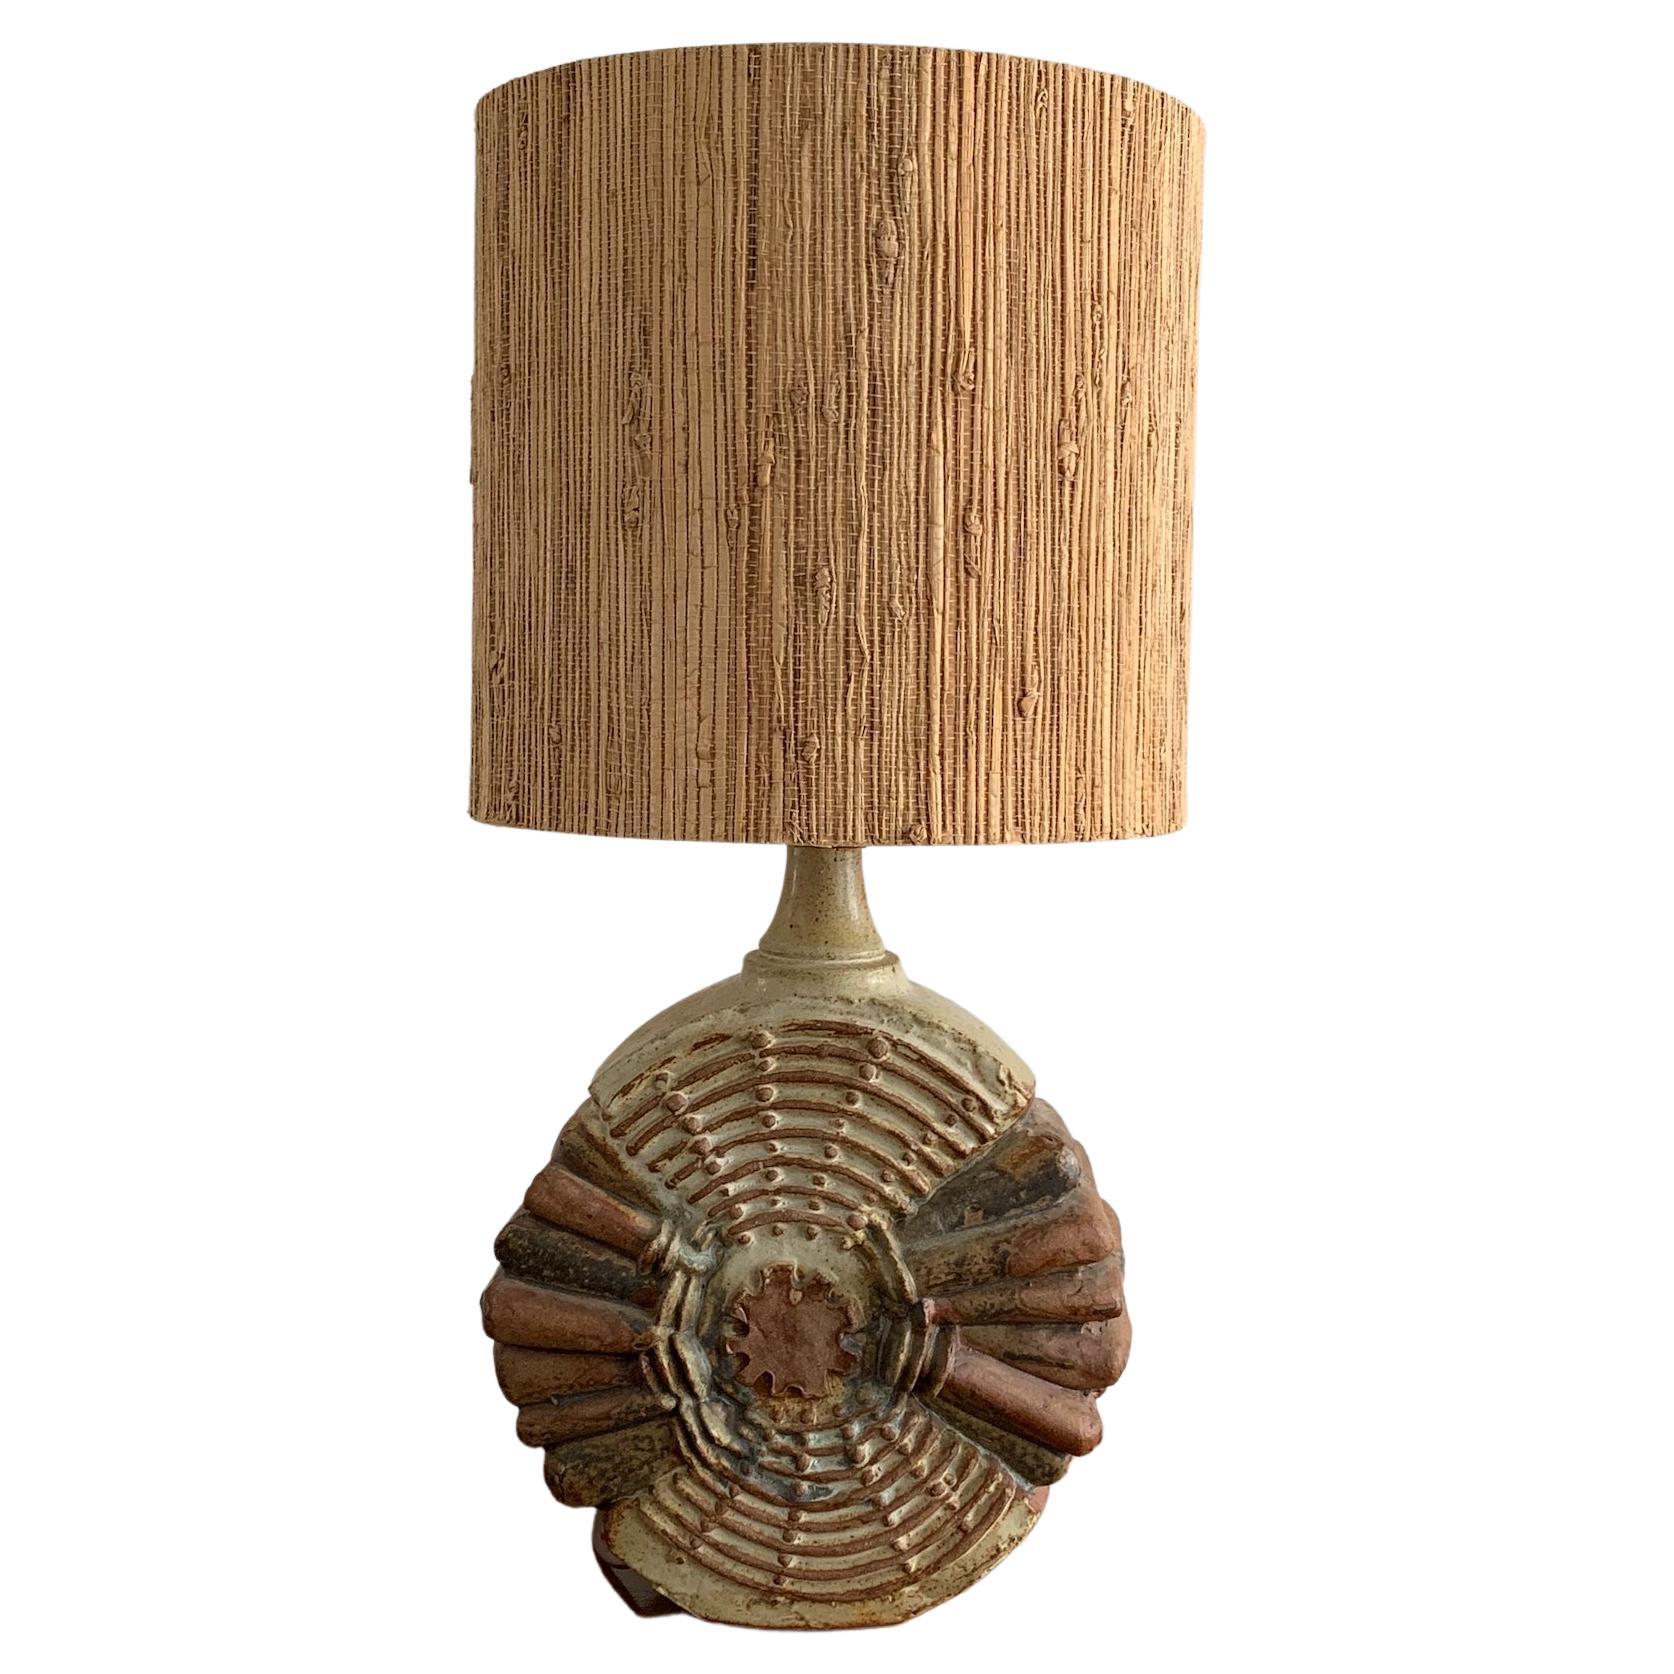 Bernard Rooke Table Lamp with Original Shade, England, 1960 For Sale